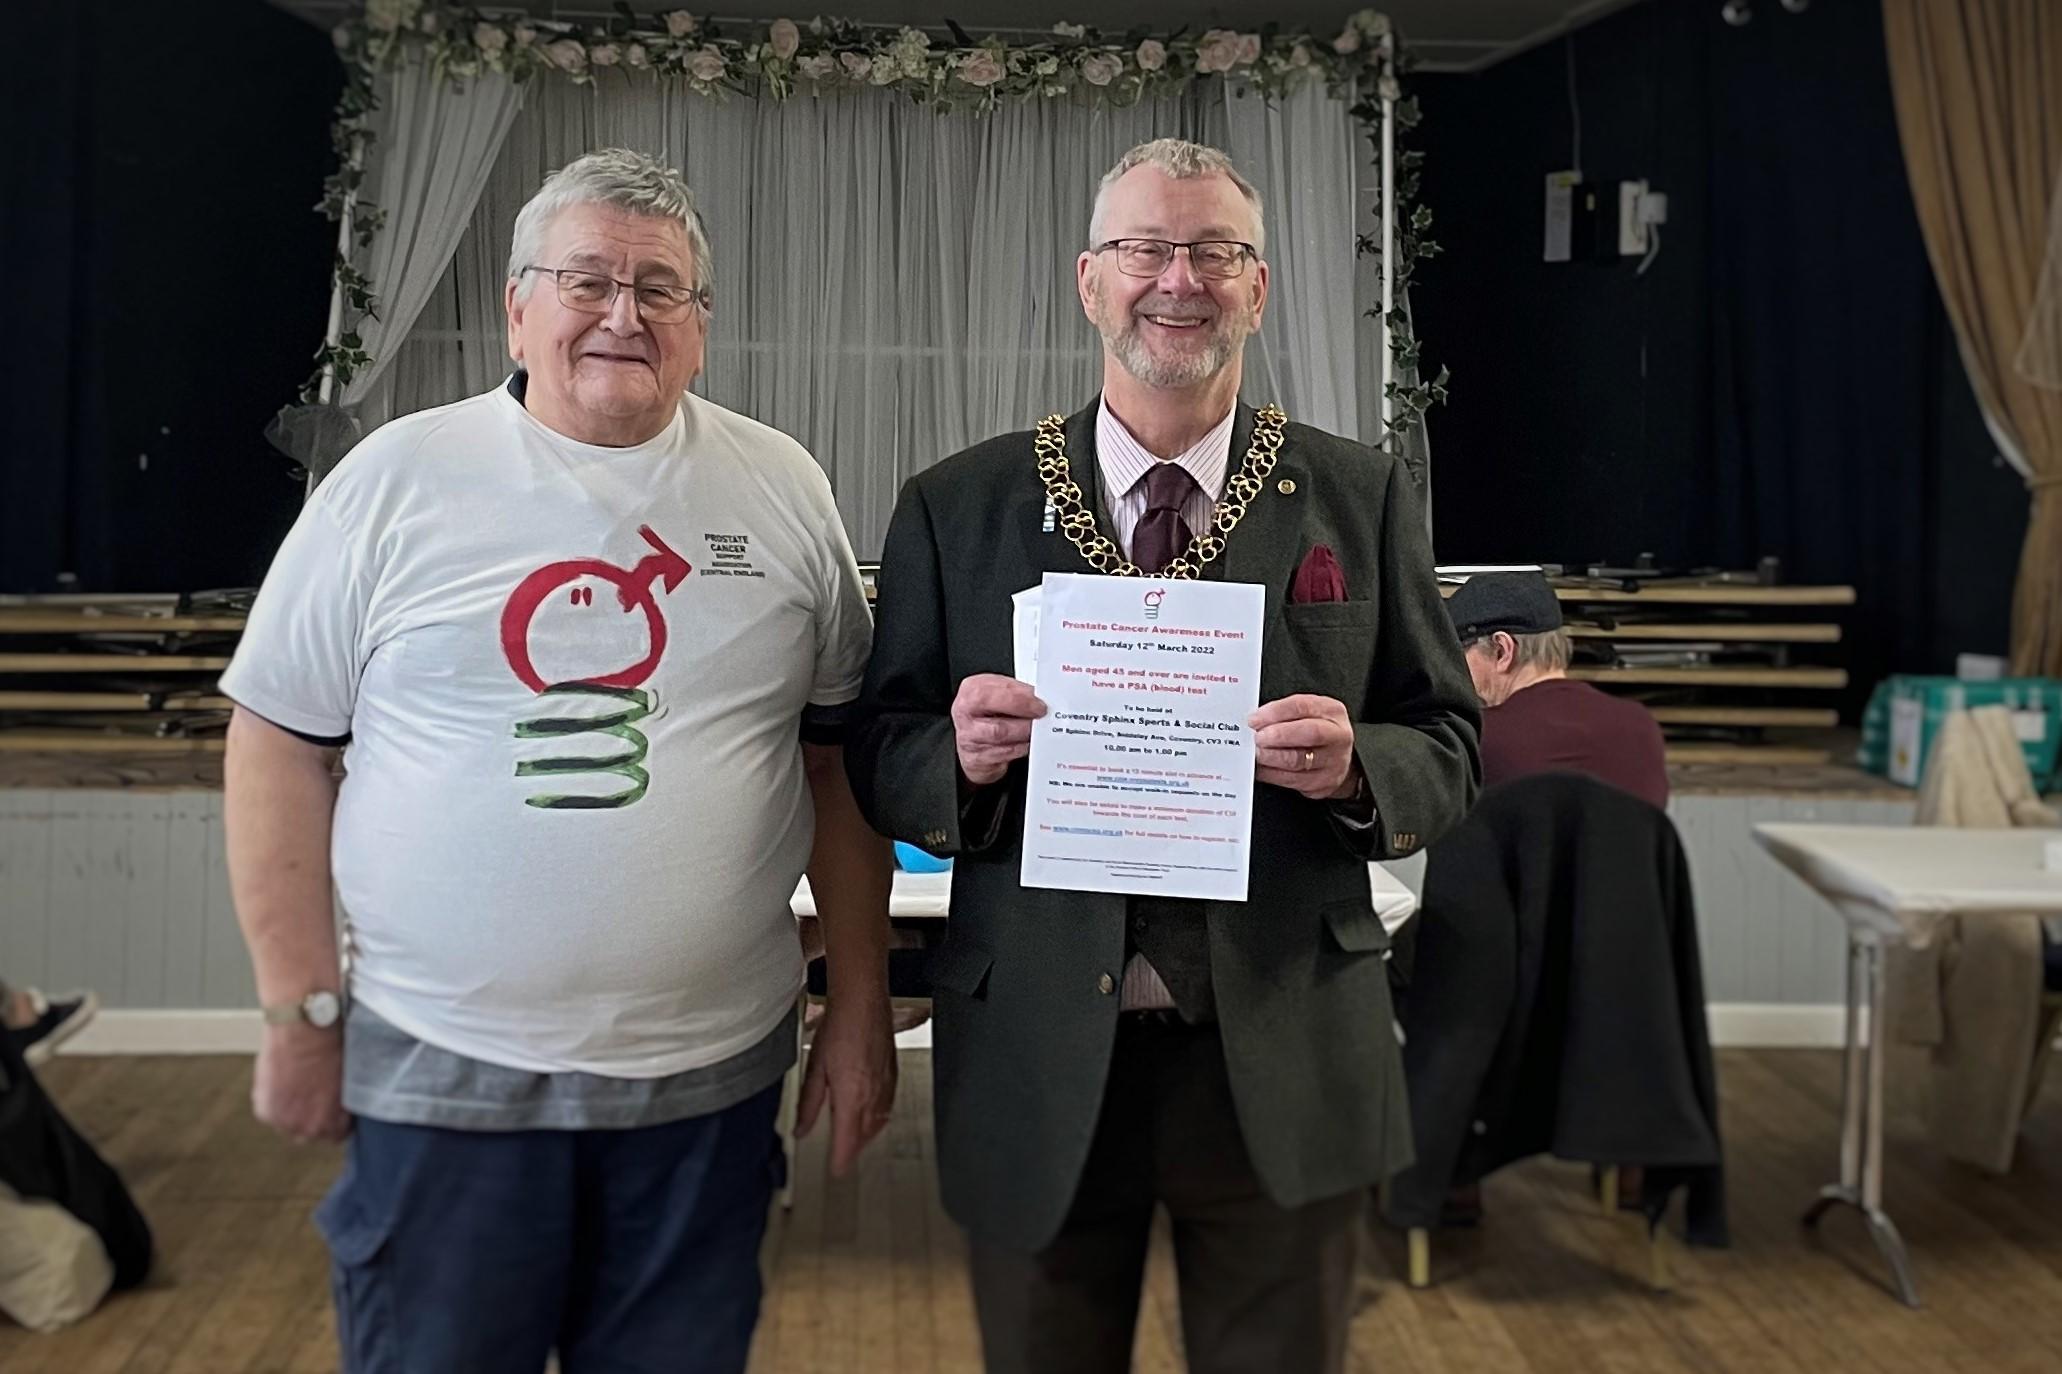 Lord Mayor Councillor John McNicholas (right) with Brian Cooley, Coventry and North Warwickshire Prostate Cancer Support Group